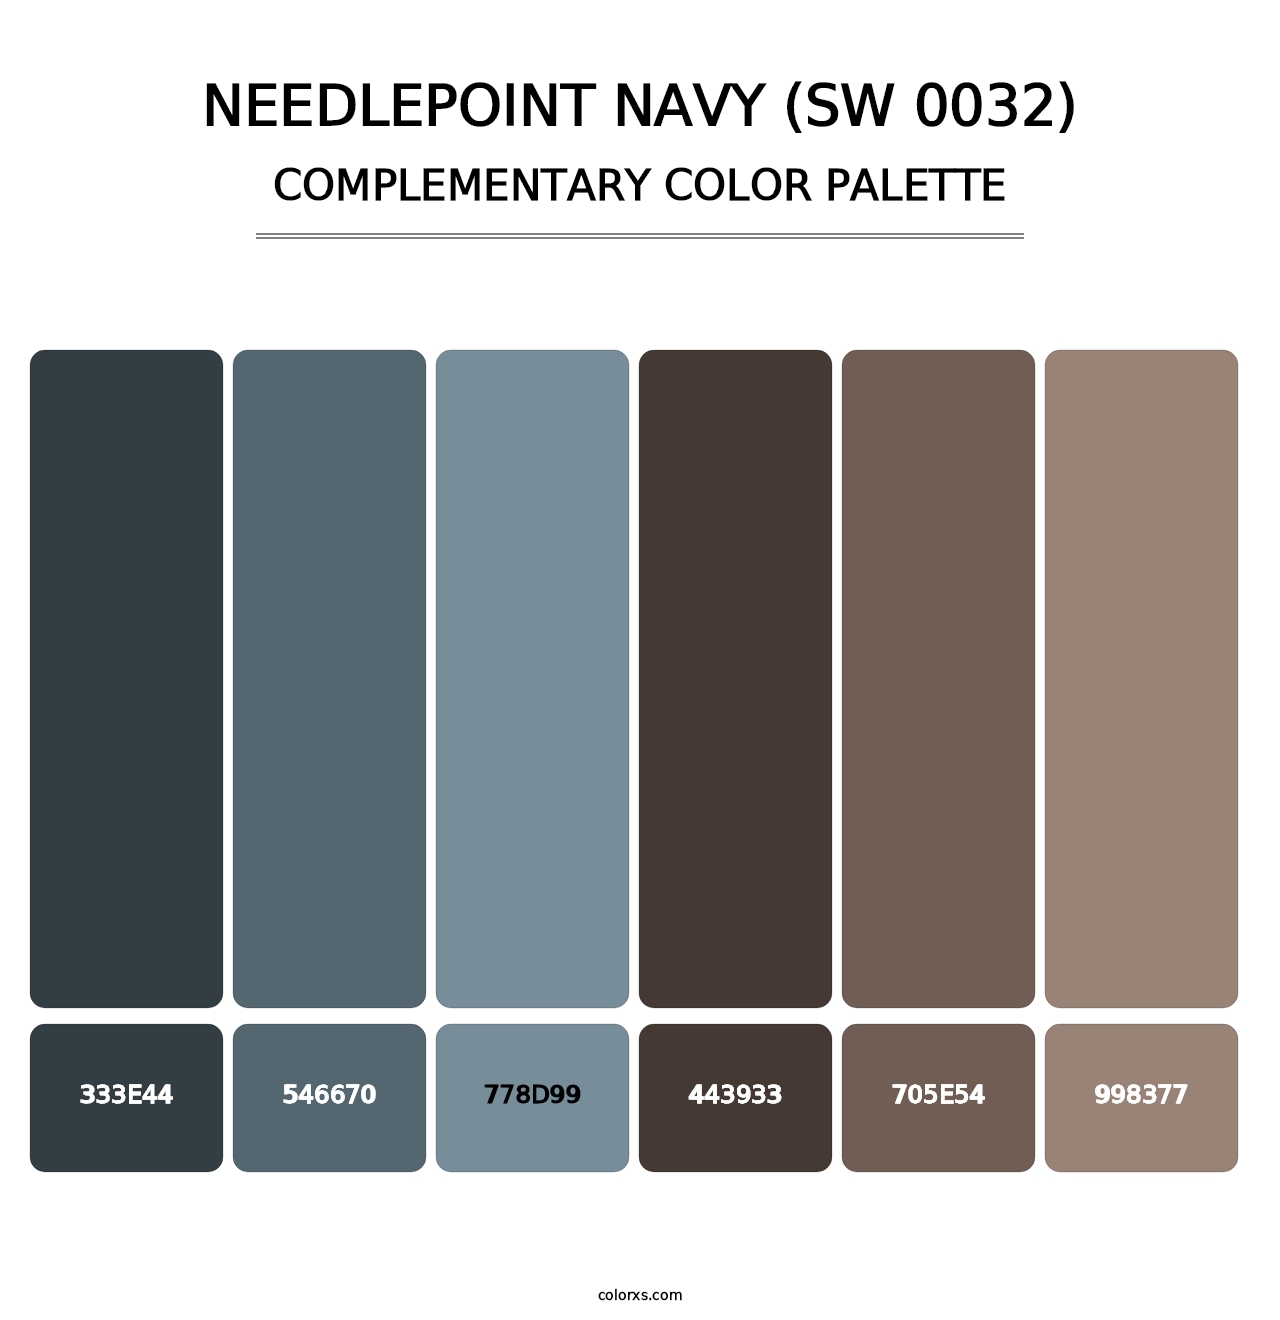 Needlepoint Navy (SW 0032) - Complementary Color Palette